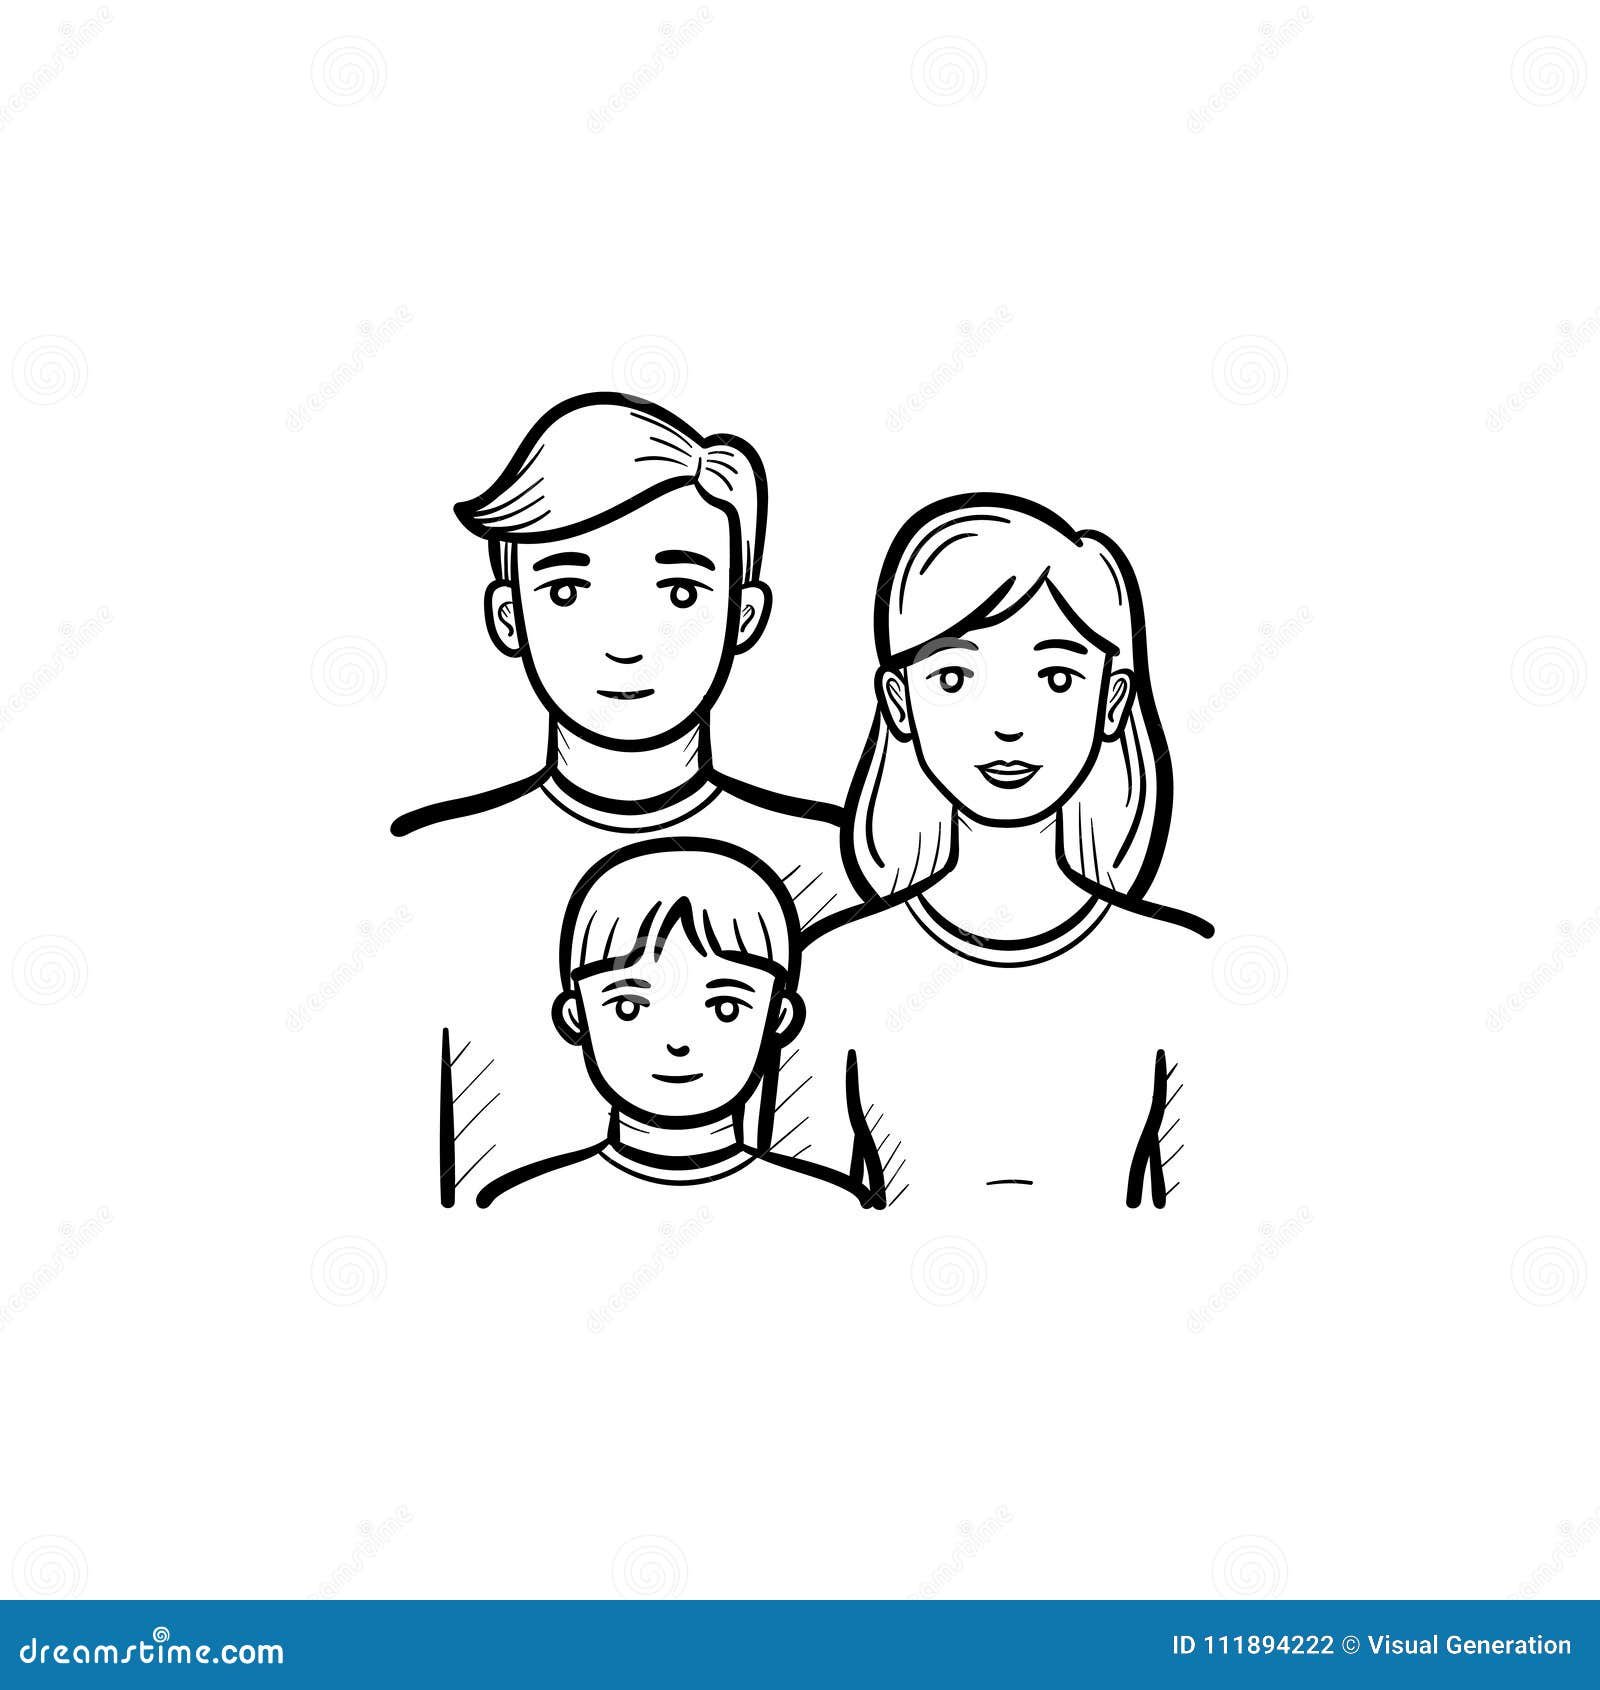 Premium Vector  Vector sketches contours people family